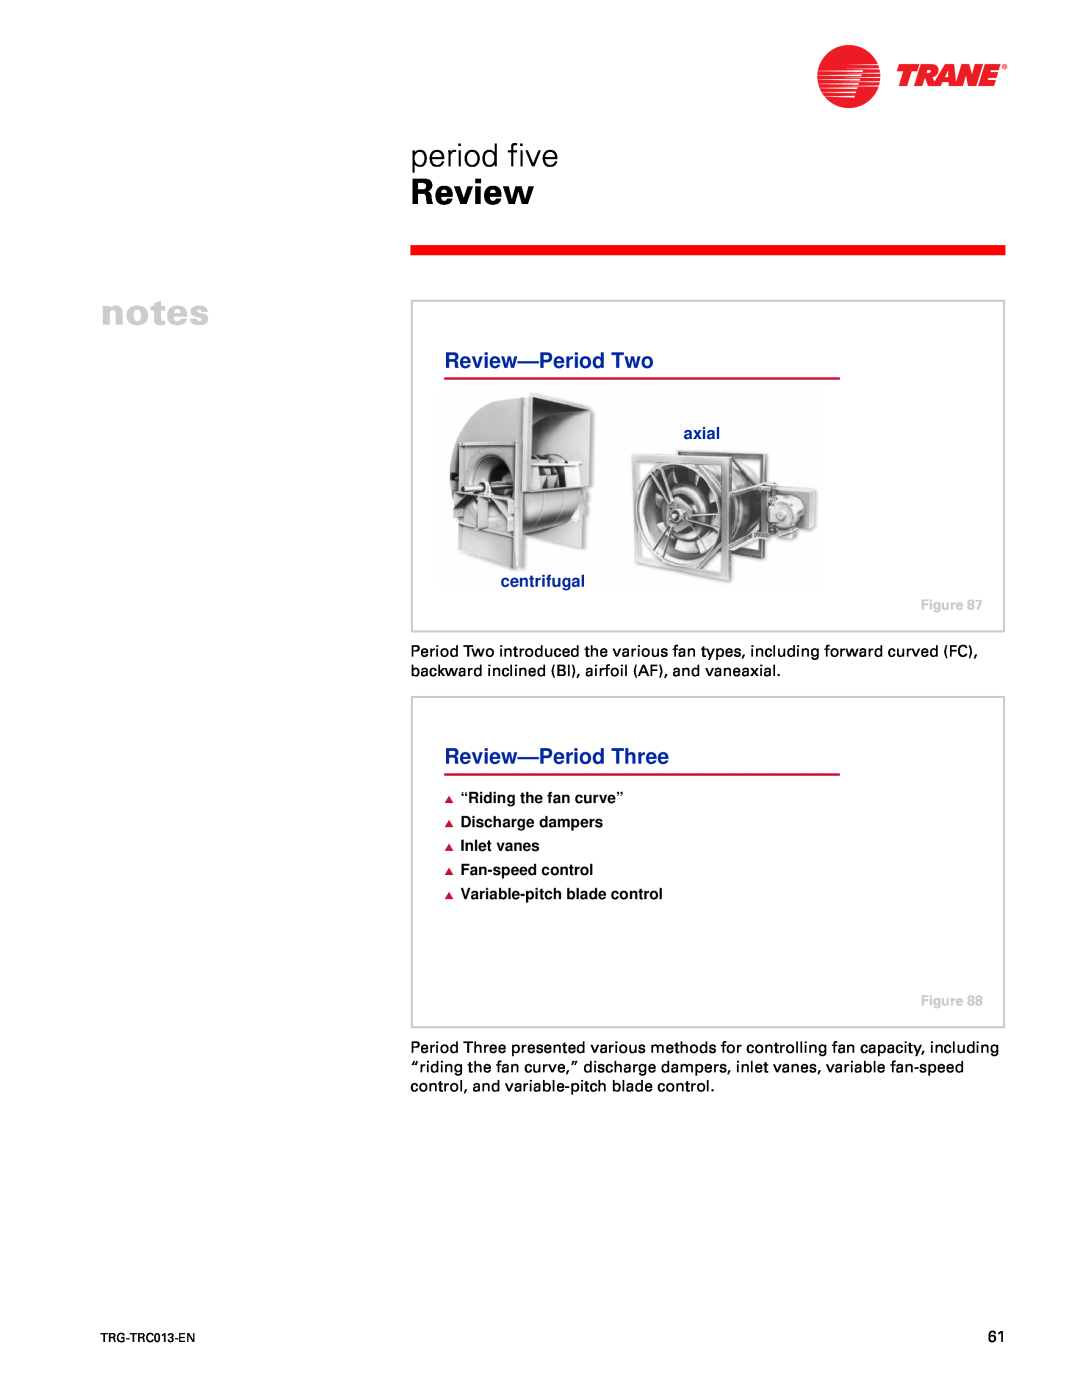 Trane TRG-TRC013-EN Review-PeriodTwo, Review-PeriodThree, axial centrifugal, “Riding the fan curve” Discharge dampers 